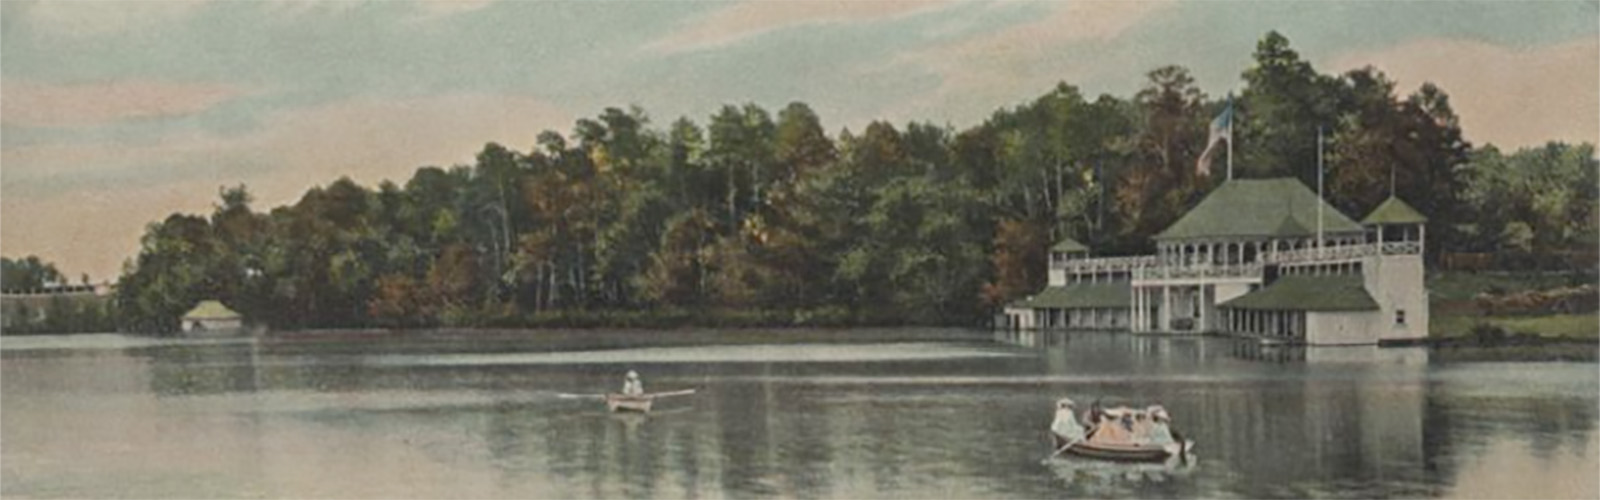 Augusta, Ga. : Lake View Park, Picturing Augusta: Historic Postcards from the Collection of the Augusta-Richmond County Public Library System